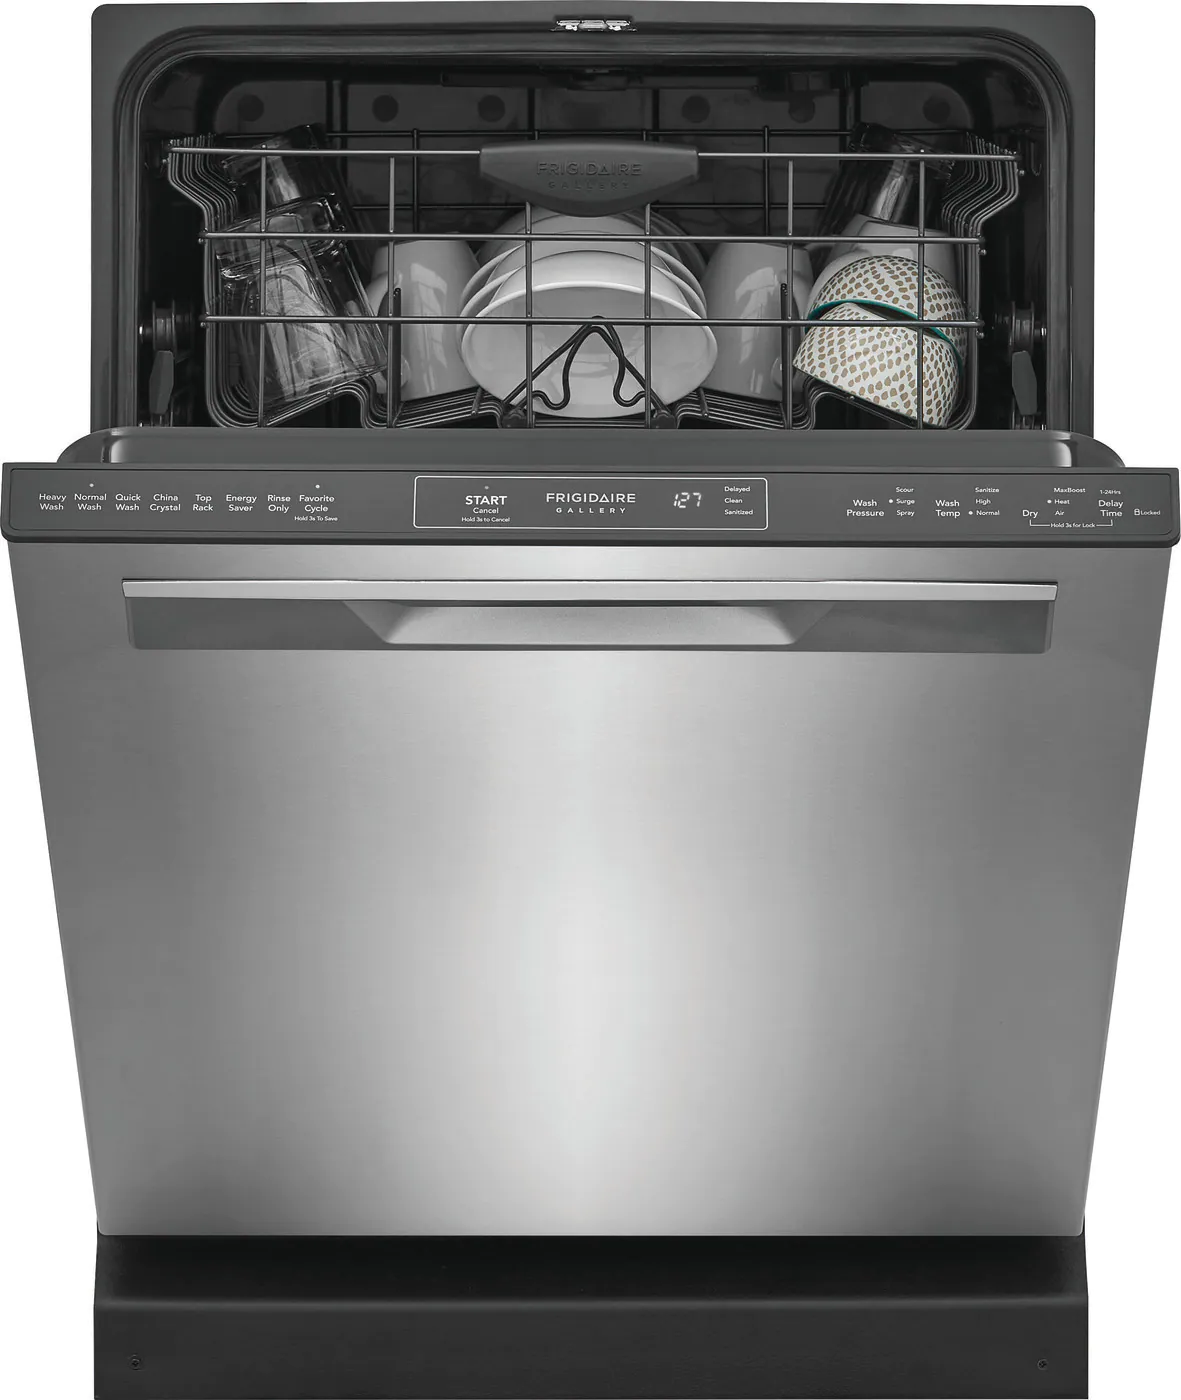 24" Frigidaire Gallery Built-In Dishwasher in Stainless Steel - GDPP4517AF